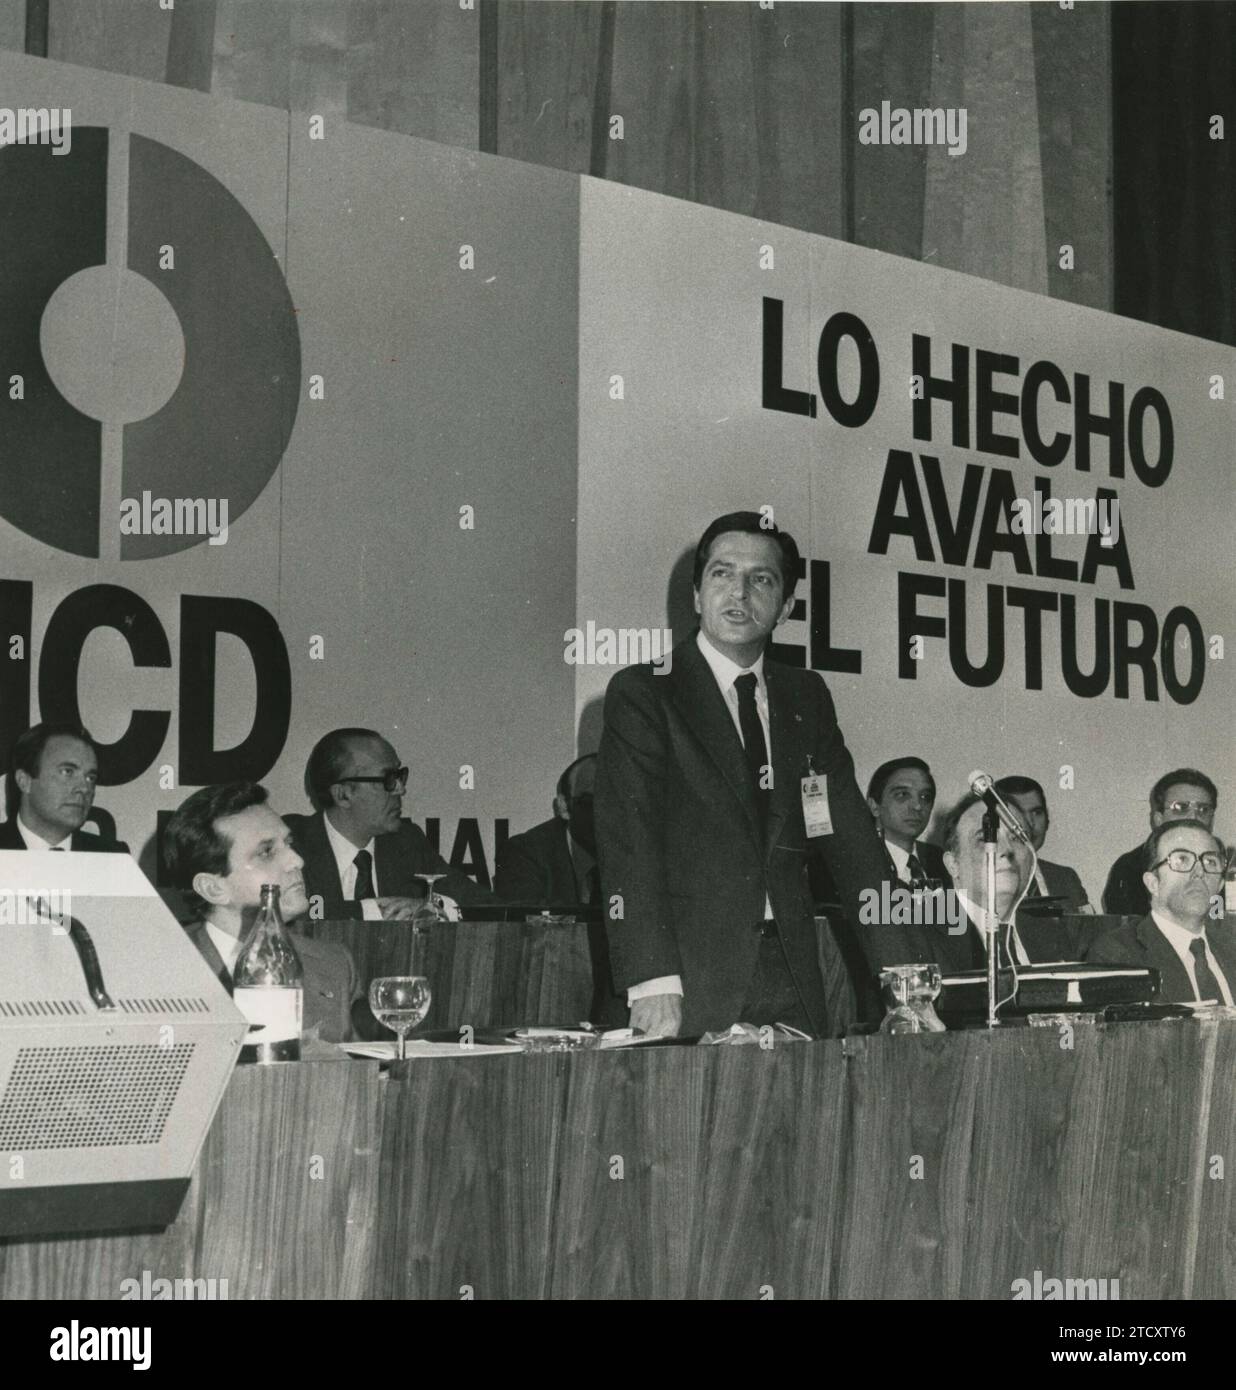 Madrid, 10/19/1978. I Congress of the Democratic Center Union in the Palace of Congresses and Exhibitions of Madrid. The opening speech was given by the President of the Government and UCD, Mr. Adolfo Suárez. Credit: Album / Archivo ABC / Teodoro Naranjo Domínguez Stock Photo